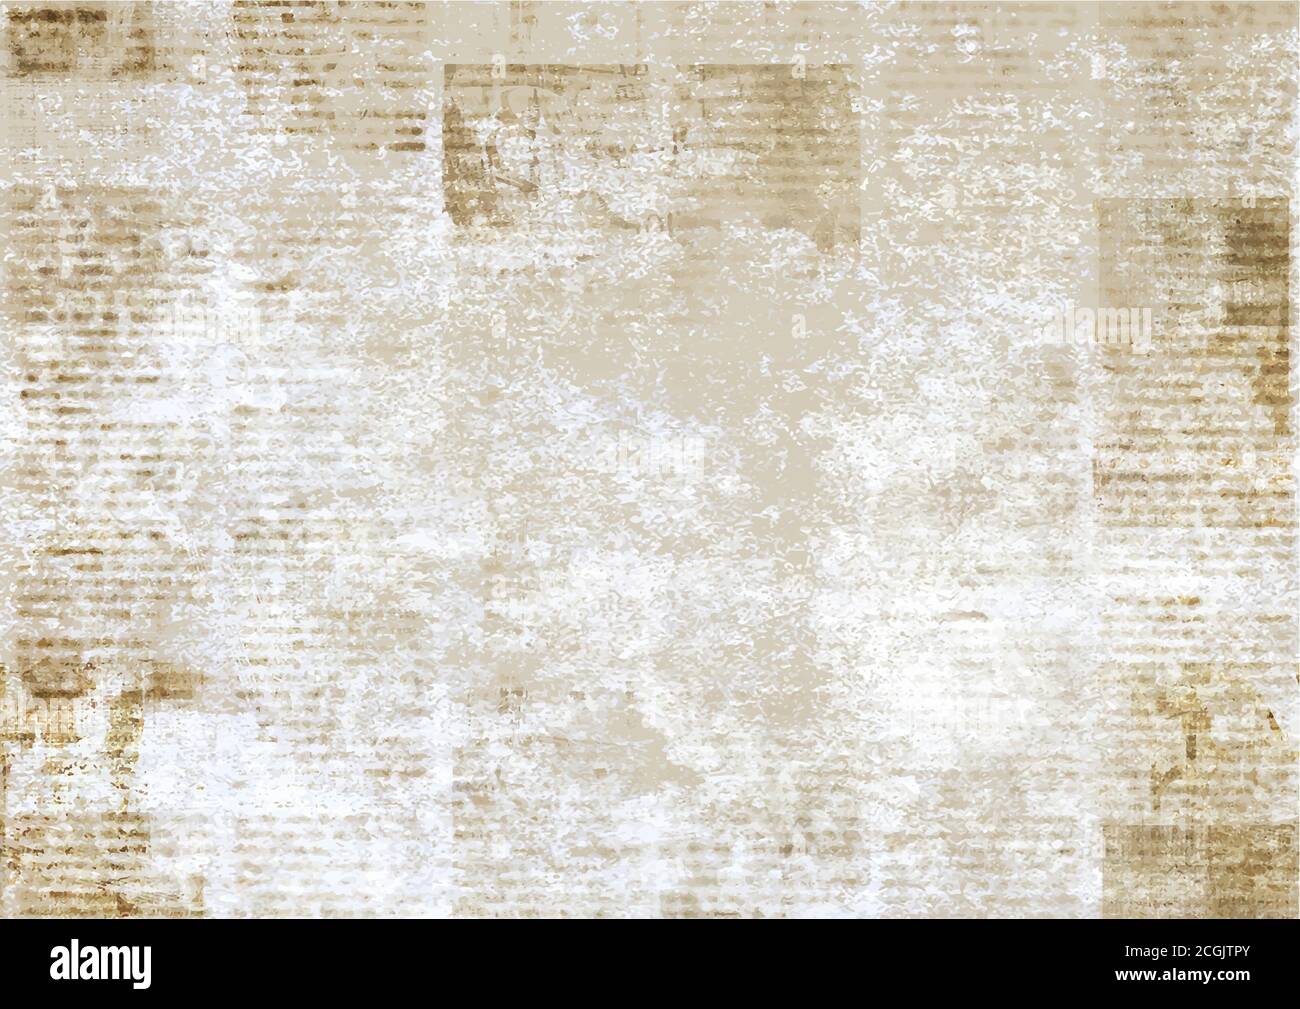 Newspaper with old unreadable text. Vintage grunge blurred paper news texture horizontal scratched background. Textured page. Sepia collage. Front top Stock Vector